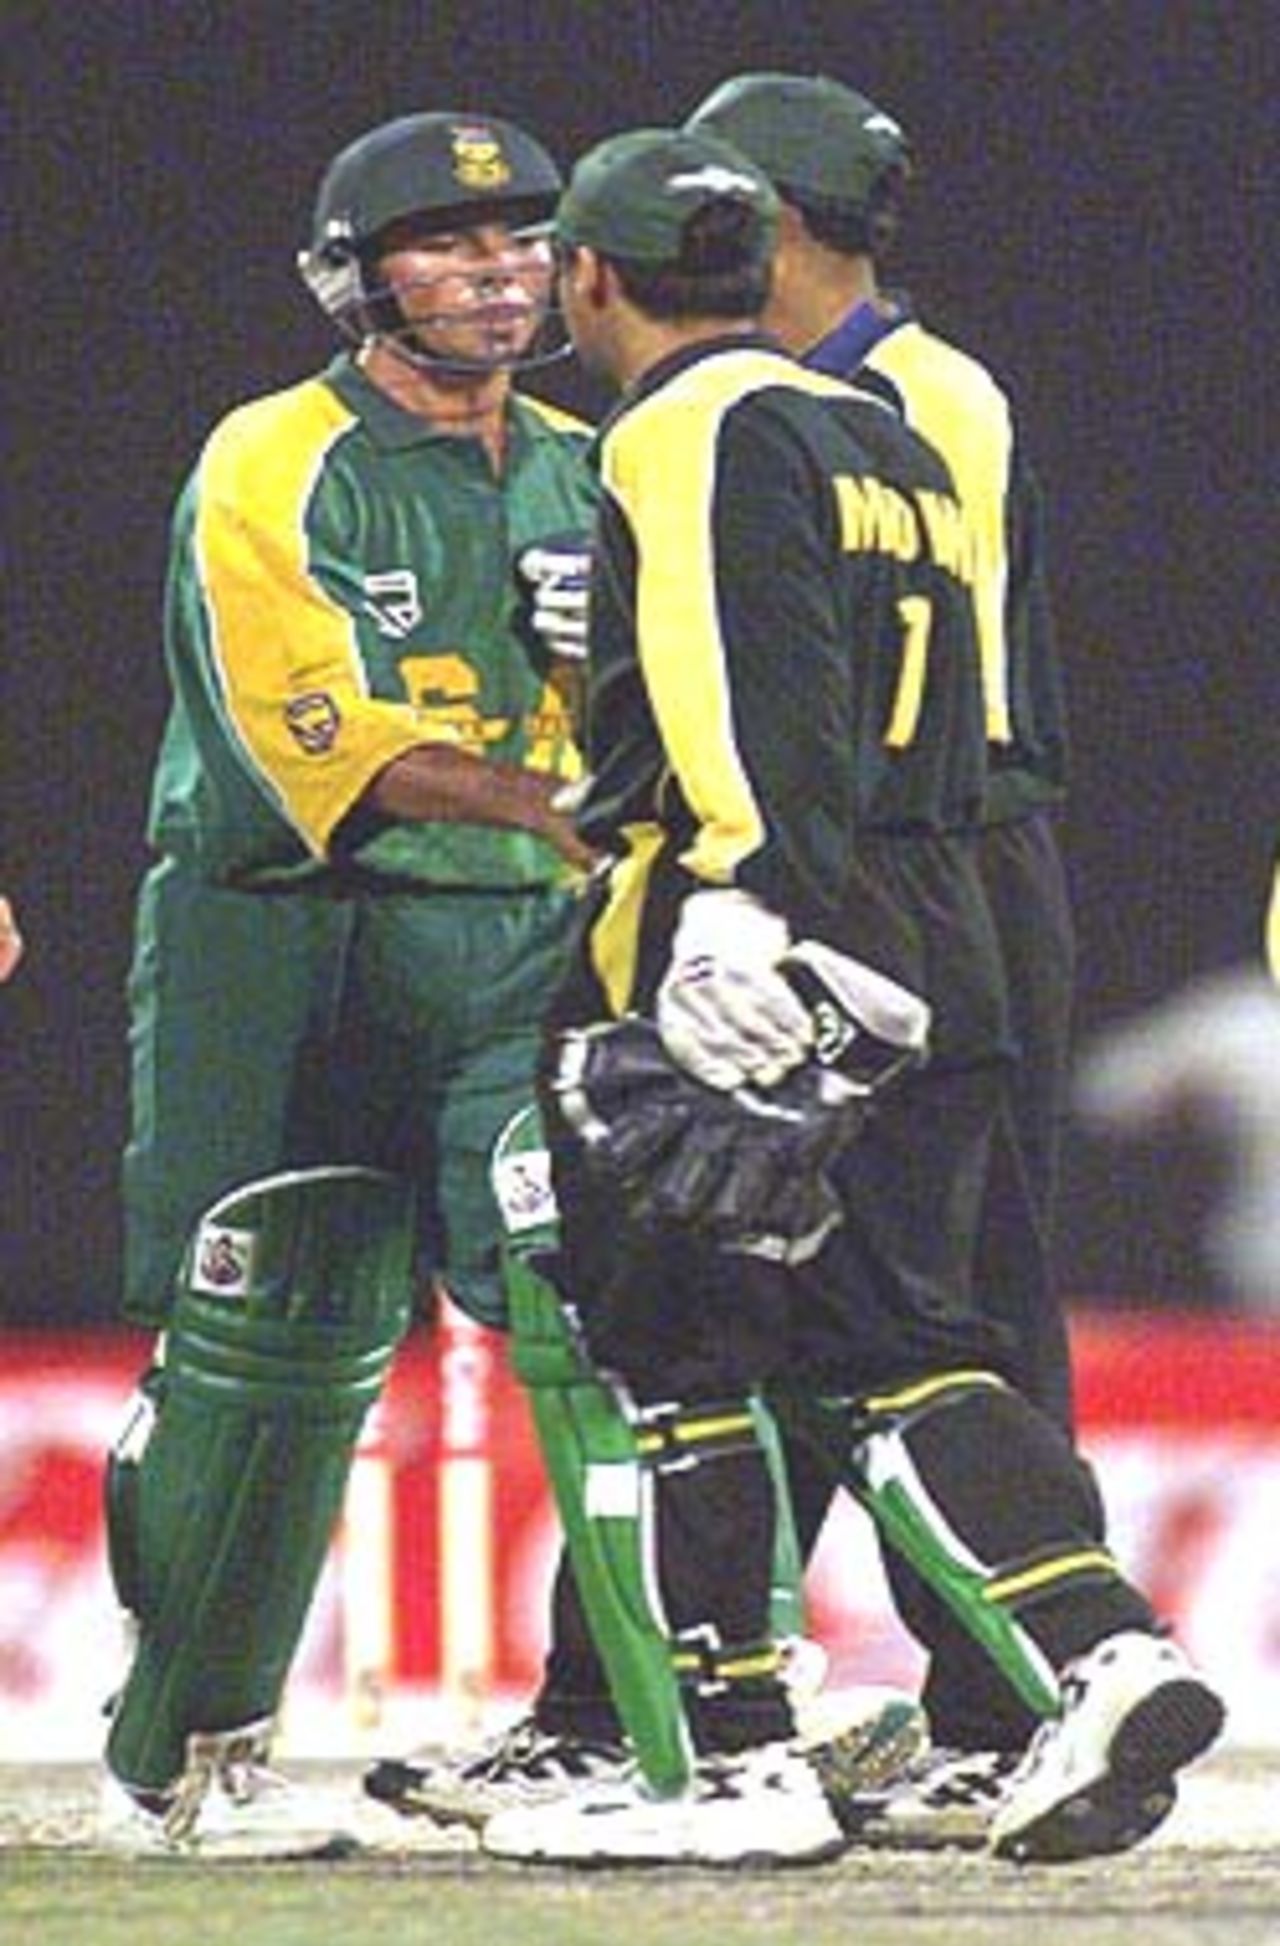 At the end of the match Moin Khan congratulates Nicky Boje, Pakistan v South Africa, Coca-Cola Cup 1999/00, C.A. Stadium Sharjah, 24 March 2000.